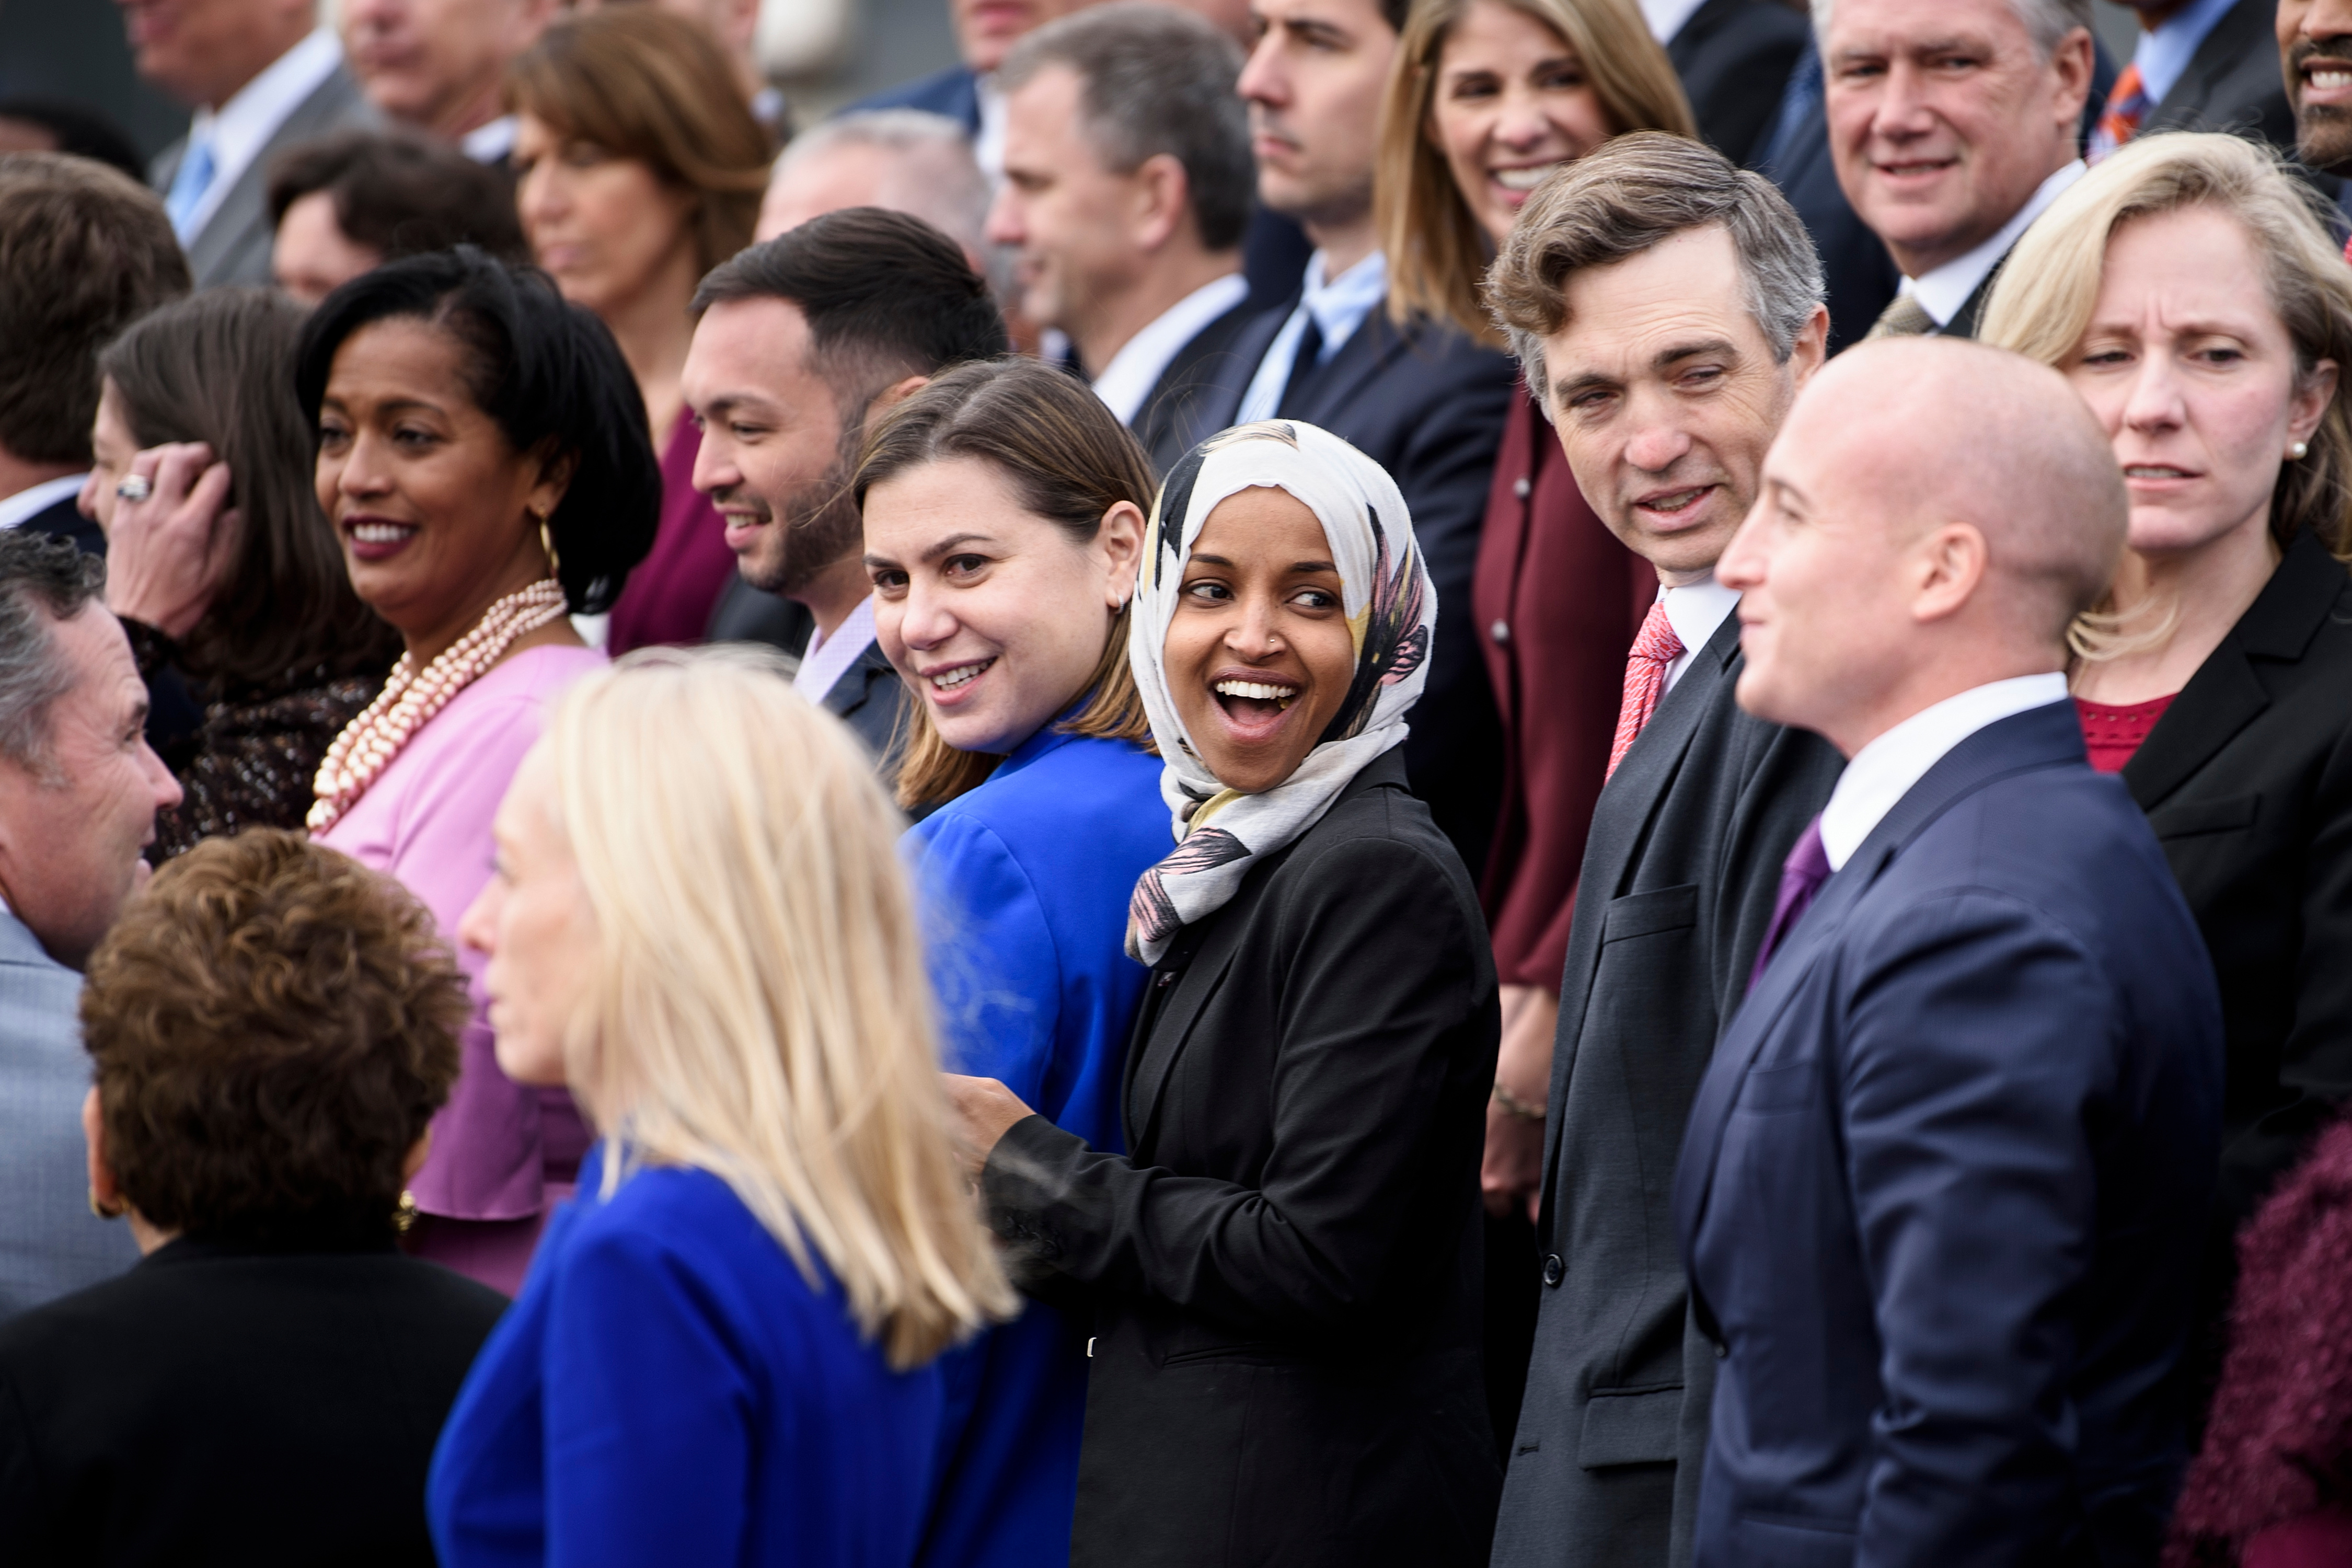 Incoming Rep. Ilhan Omar and other freshman members of the 116th Congress pose for a group photo on Capitol Hill November 14, 2018 in Washington, DC. (BRENDAN SMIALOWSKI/AFP/Getty Images)